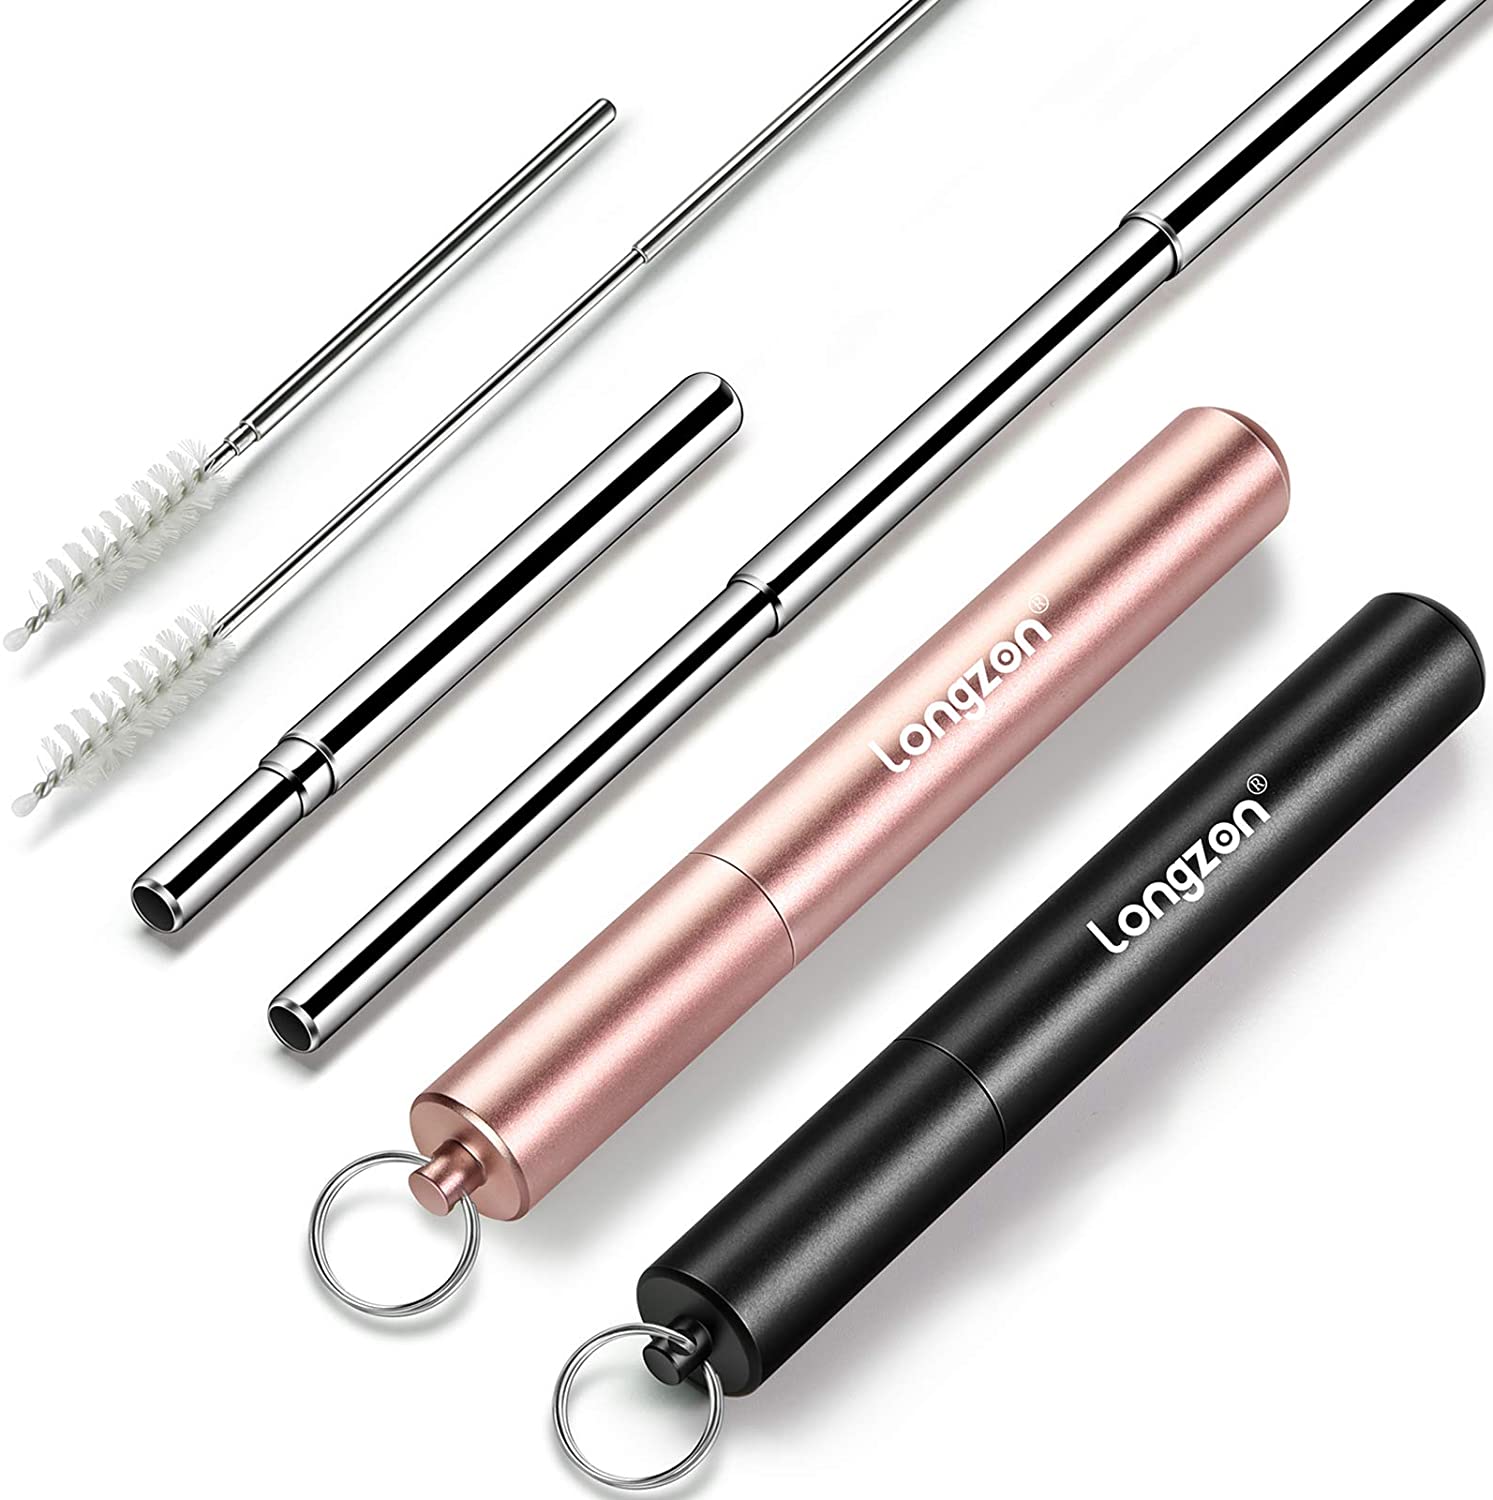 Reusable Collapsible Stainless Steel Drinking Straws (2-Pack) $4.99